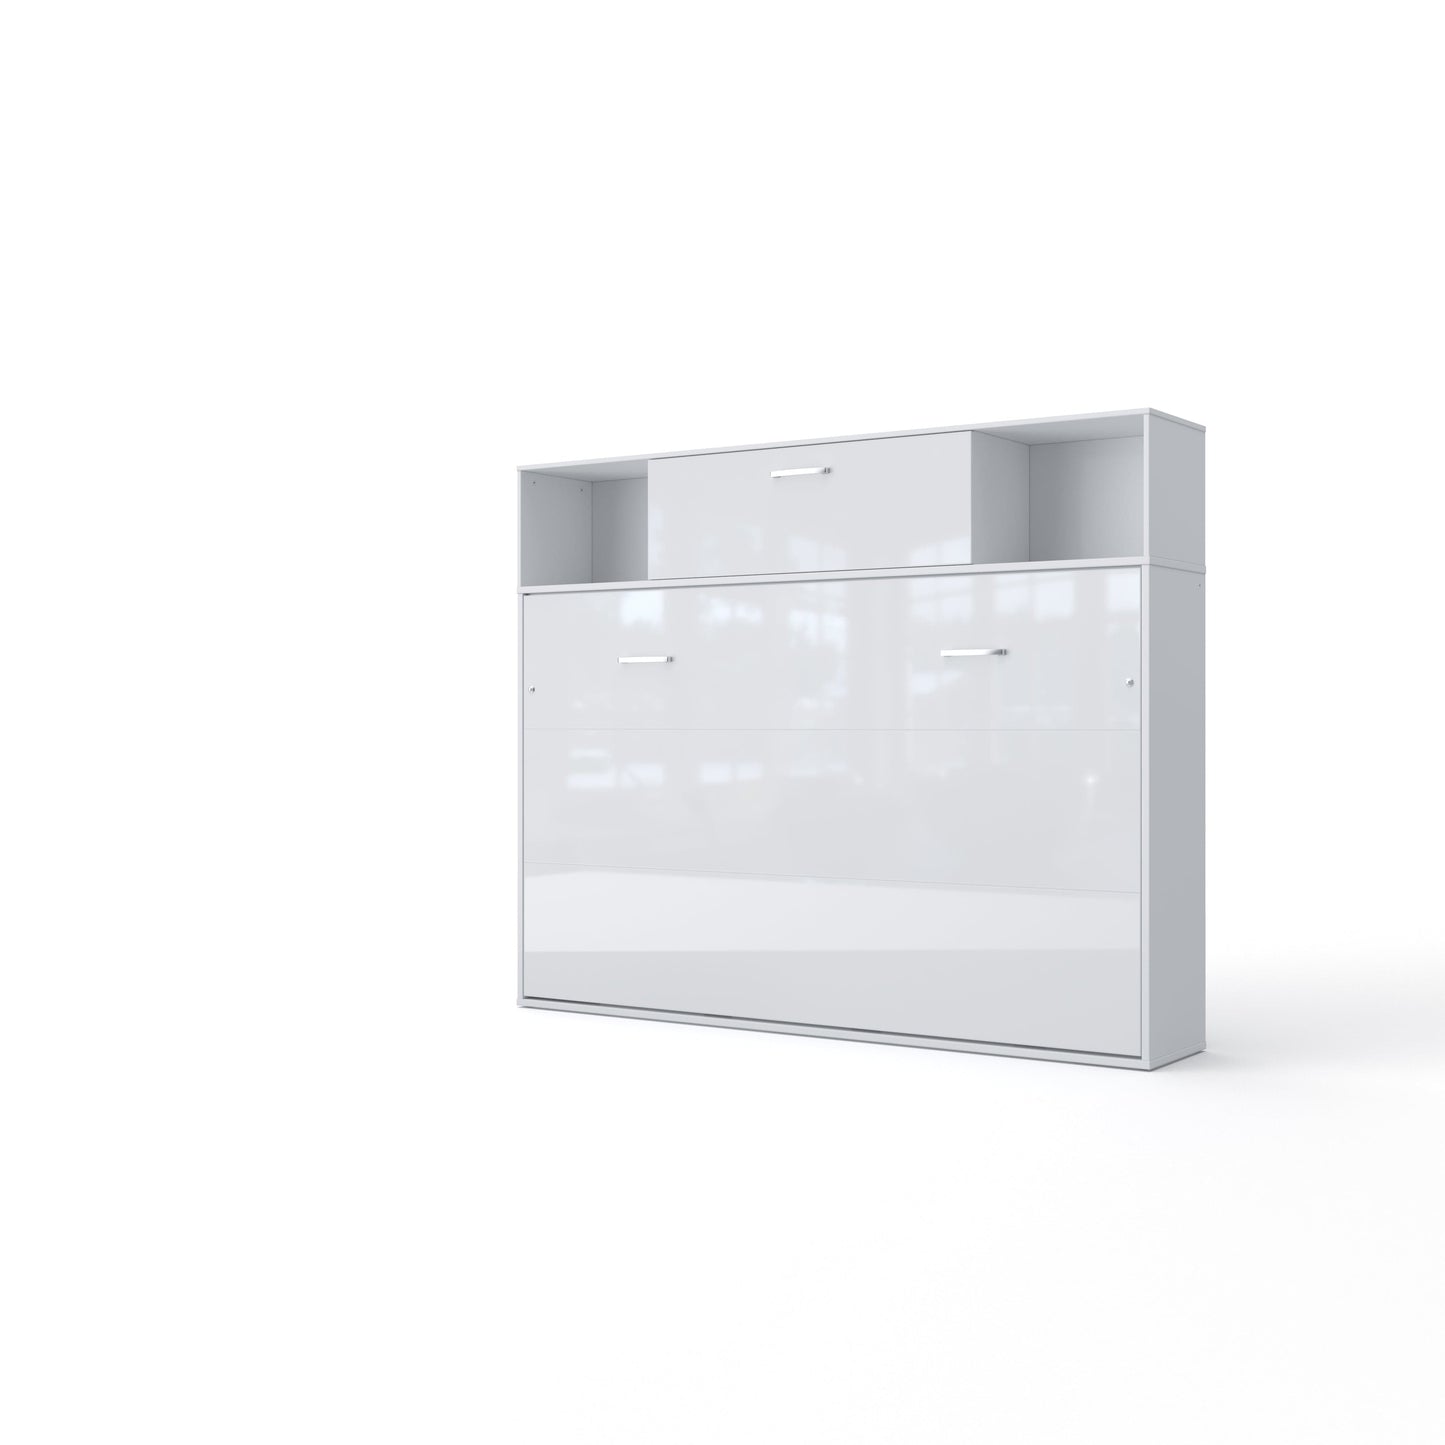 Maxima House Invento Horizontal Wall Bed, European Twin Size with a cabinet on top White/White; IN90H-13W